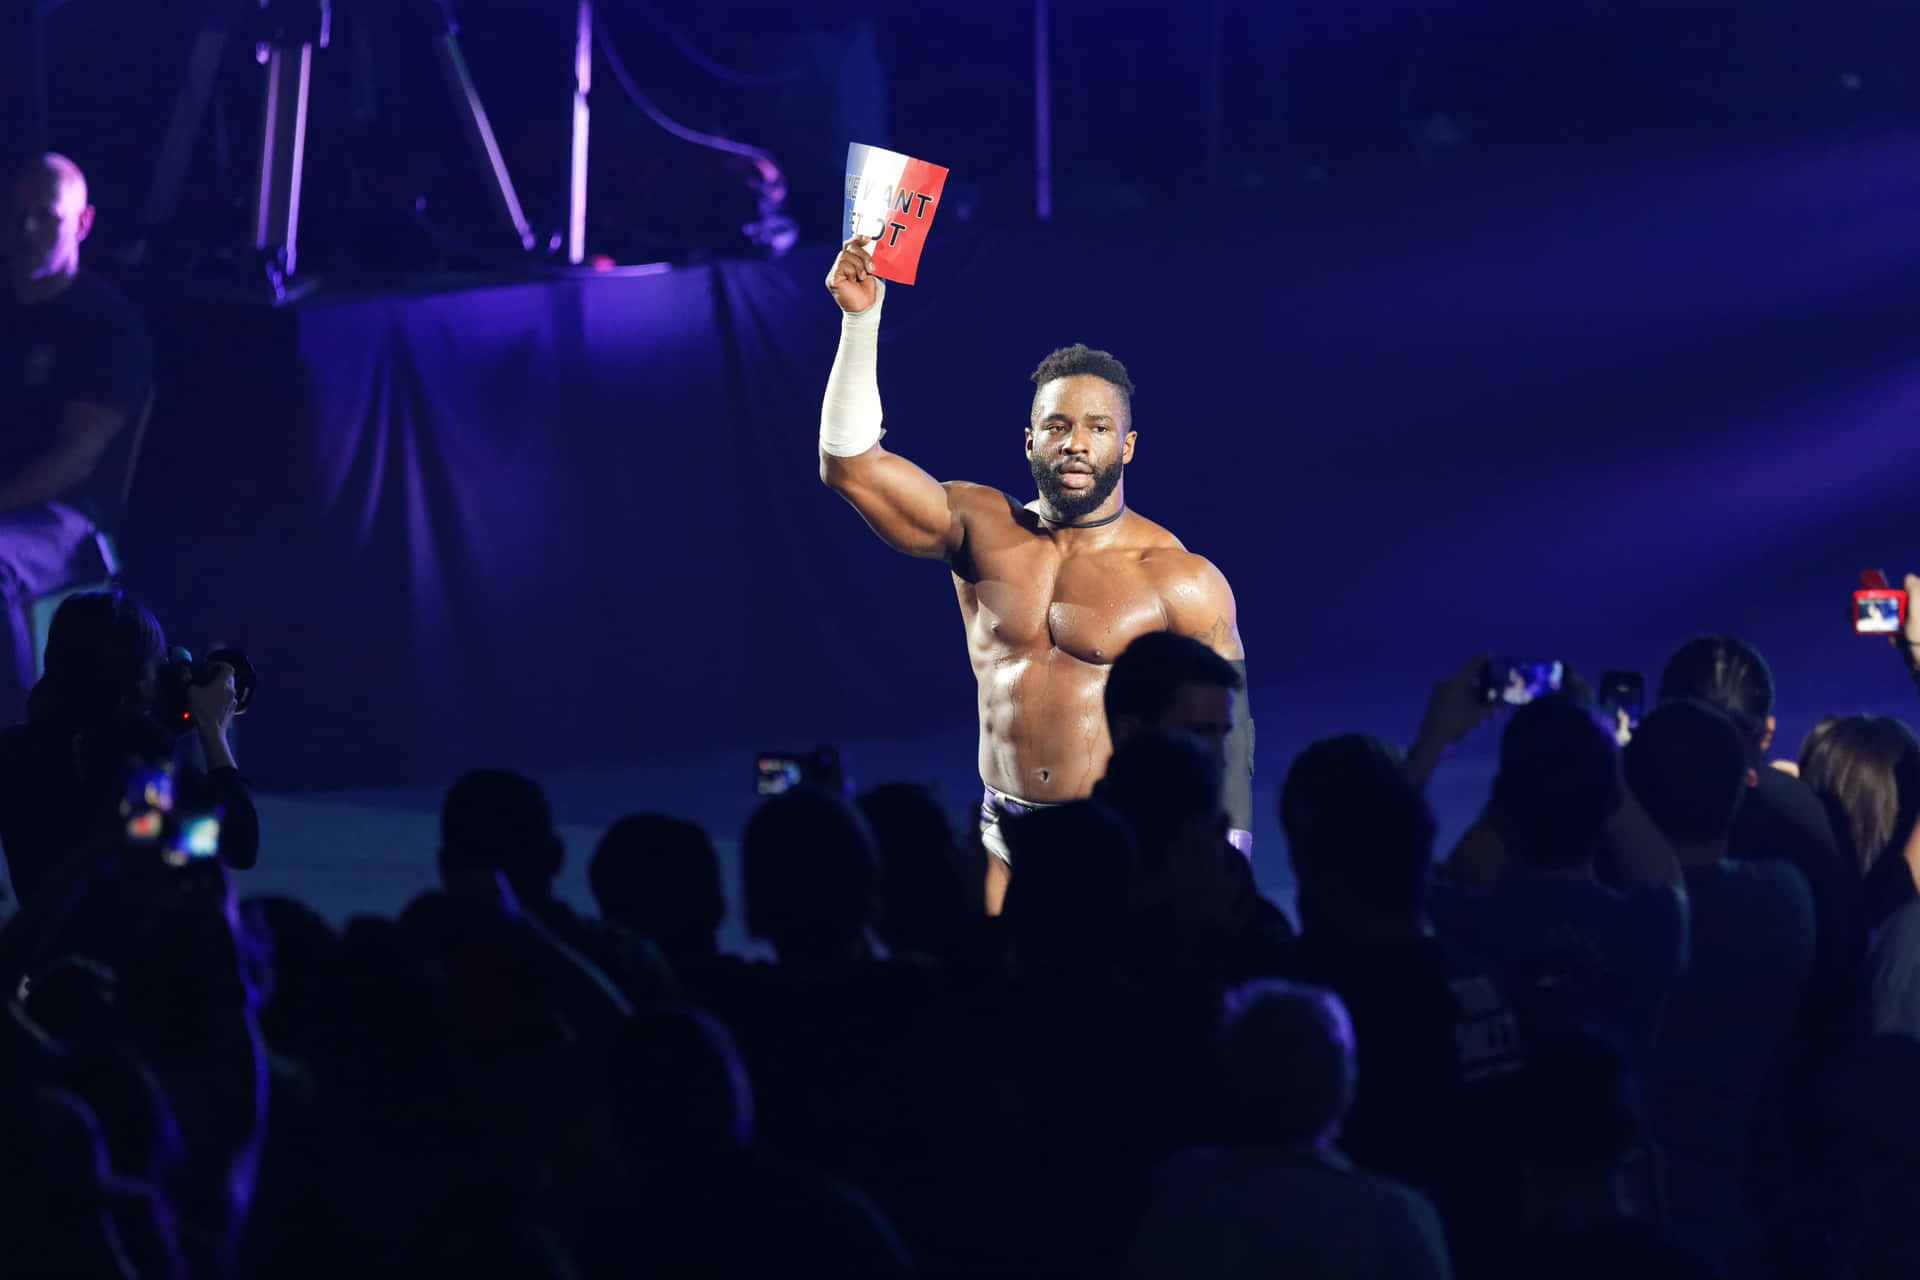 Cedric Alexander performs live at the WWE Paris Event at AccorHotels Arena. Wallpaper